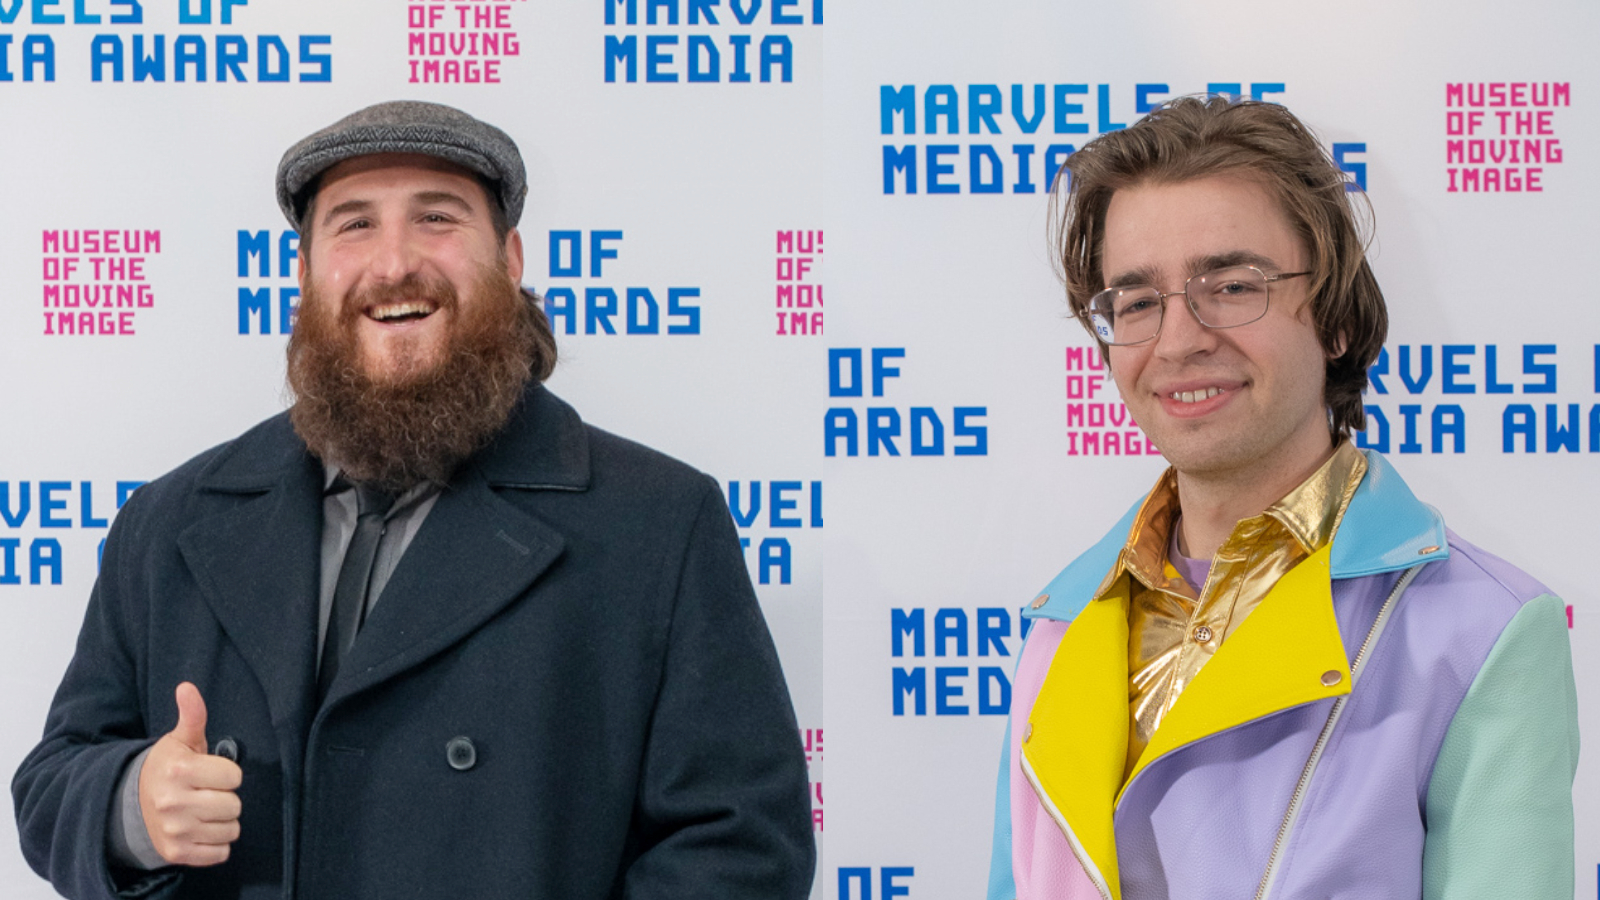 A bearded person in a coat smiles and gives the thumbs up and another wearing a multicolored jacket and glasses smiles, both with a Museum and Marvels of Media step-and-repeat in the background